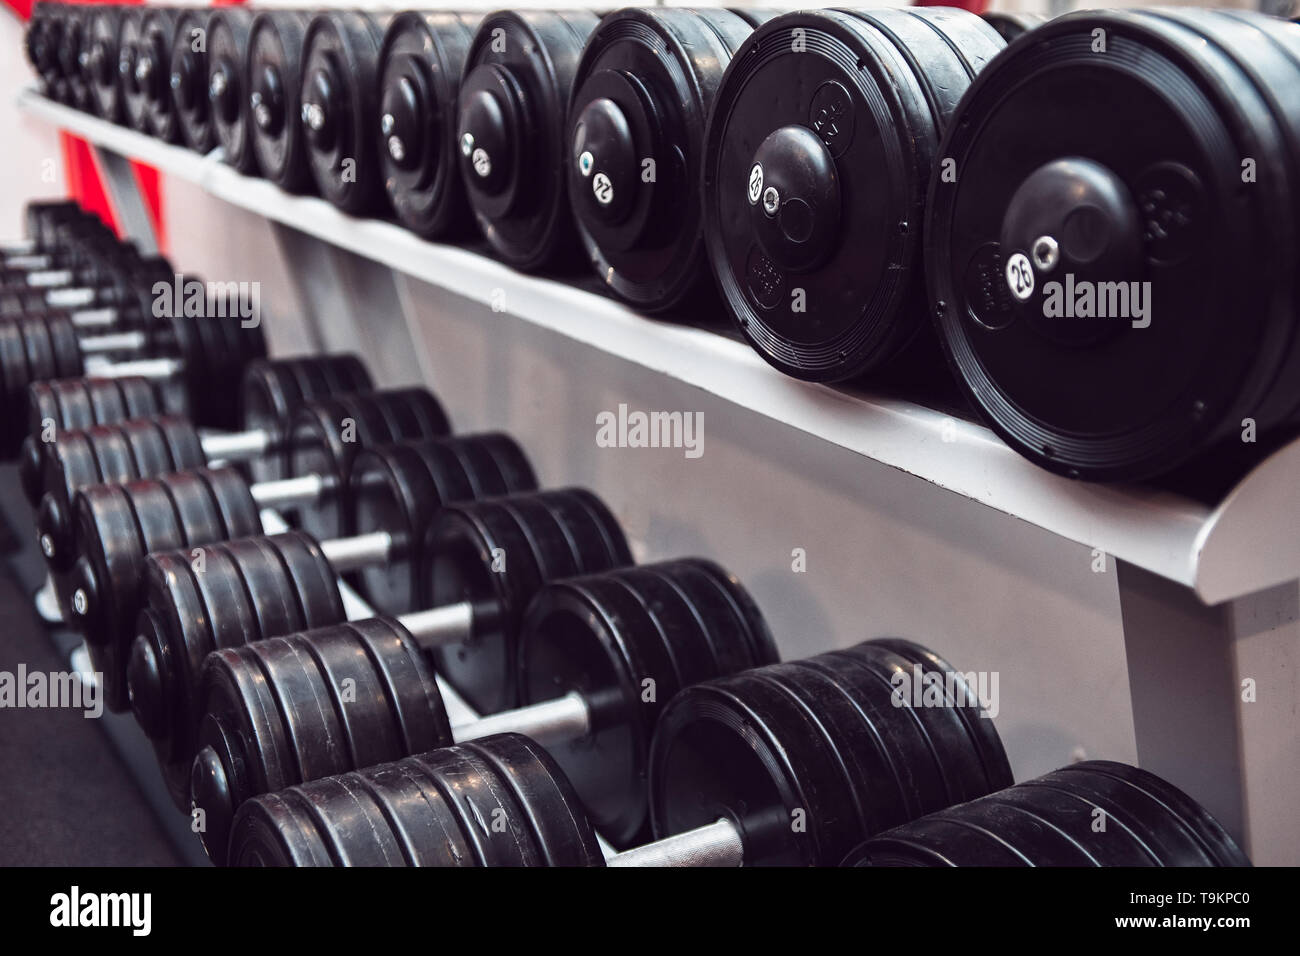 Gym and dumbbell weight training equipment on sport. Healthy life and gym exercise equipments and sports concept. Сopy space. Stock Photo